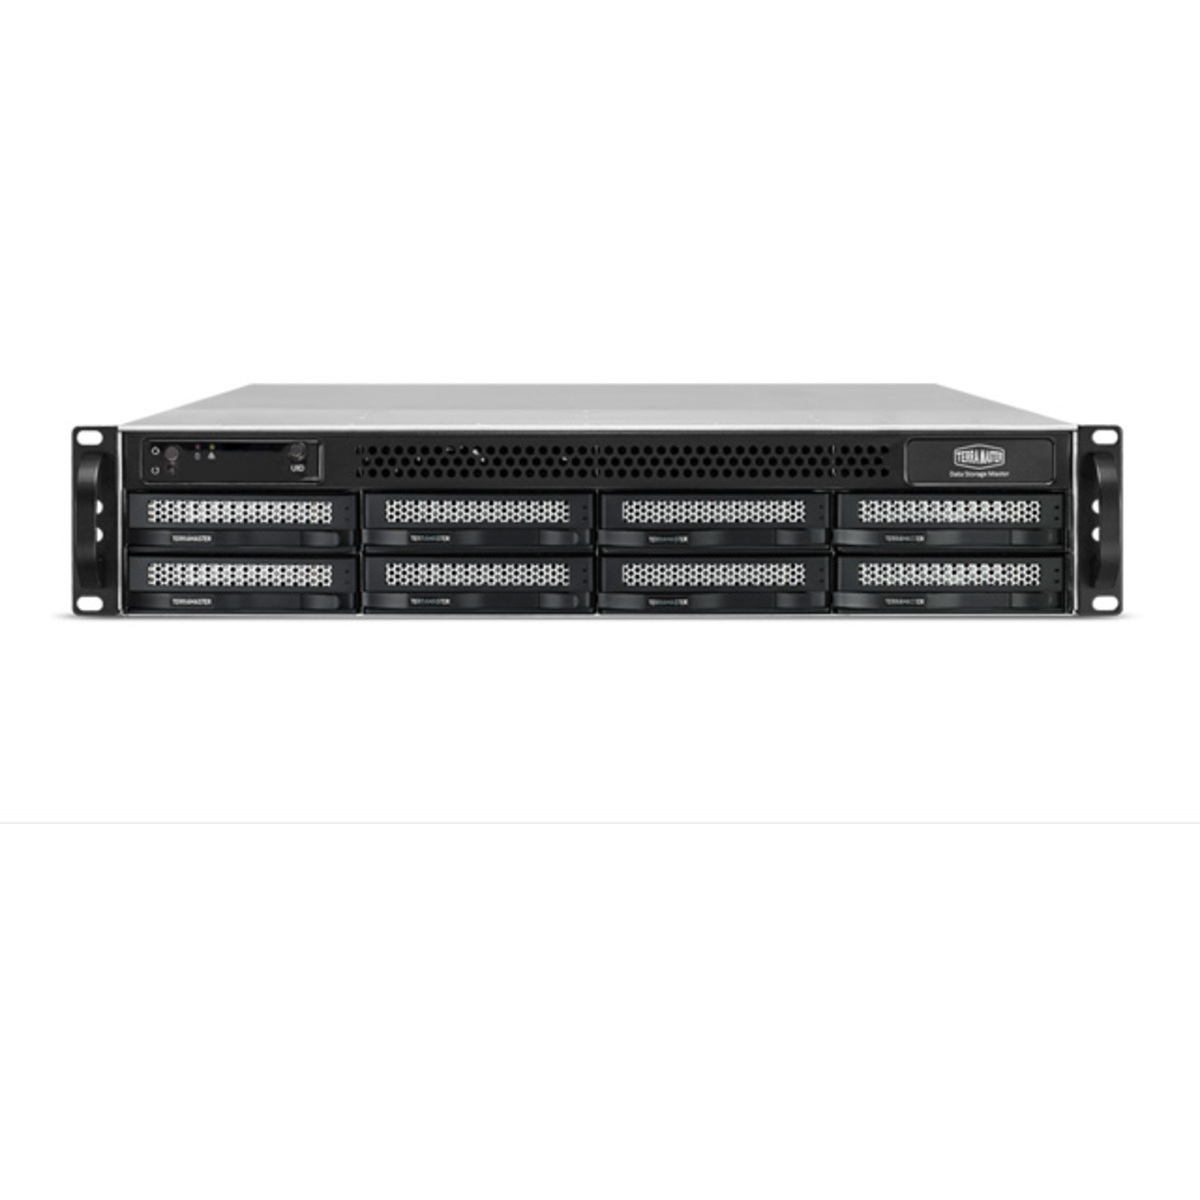 TerraMaster U8-423 12tb 8-Bay RackMount Multimedia / Power User / Business NAS - Network Attached Storage Device 6x2tb Sandisk Ultra 3D SDSSDH3-2T00 2.5 560/520MB/s SATA 6Gb/s SSD CONSUMER Class Drives Installed - Burn-In Tested - FREE RAM UPGRADE U8-423